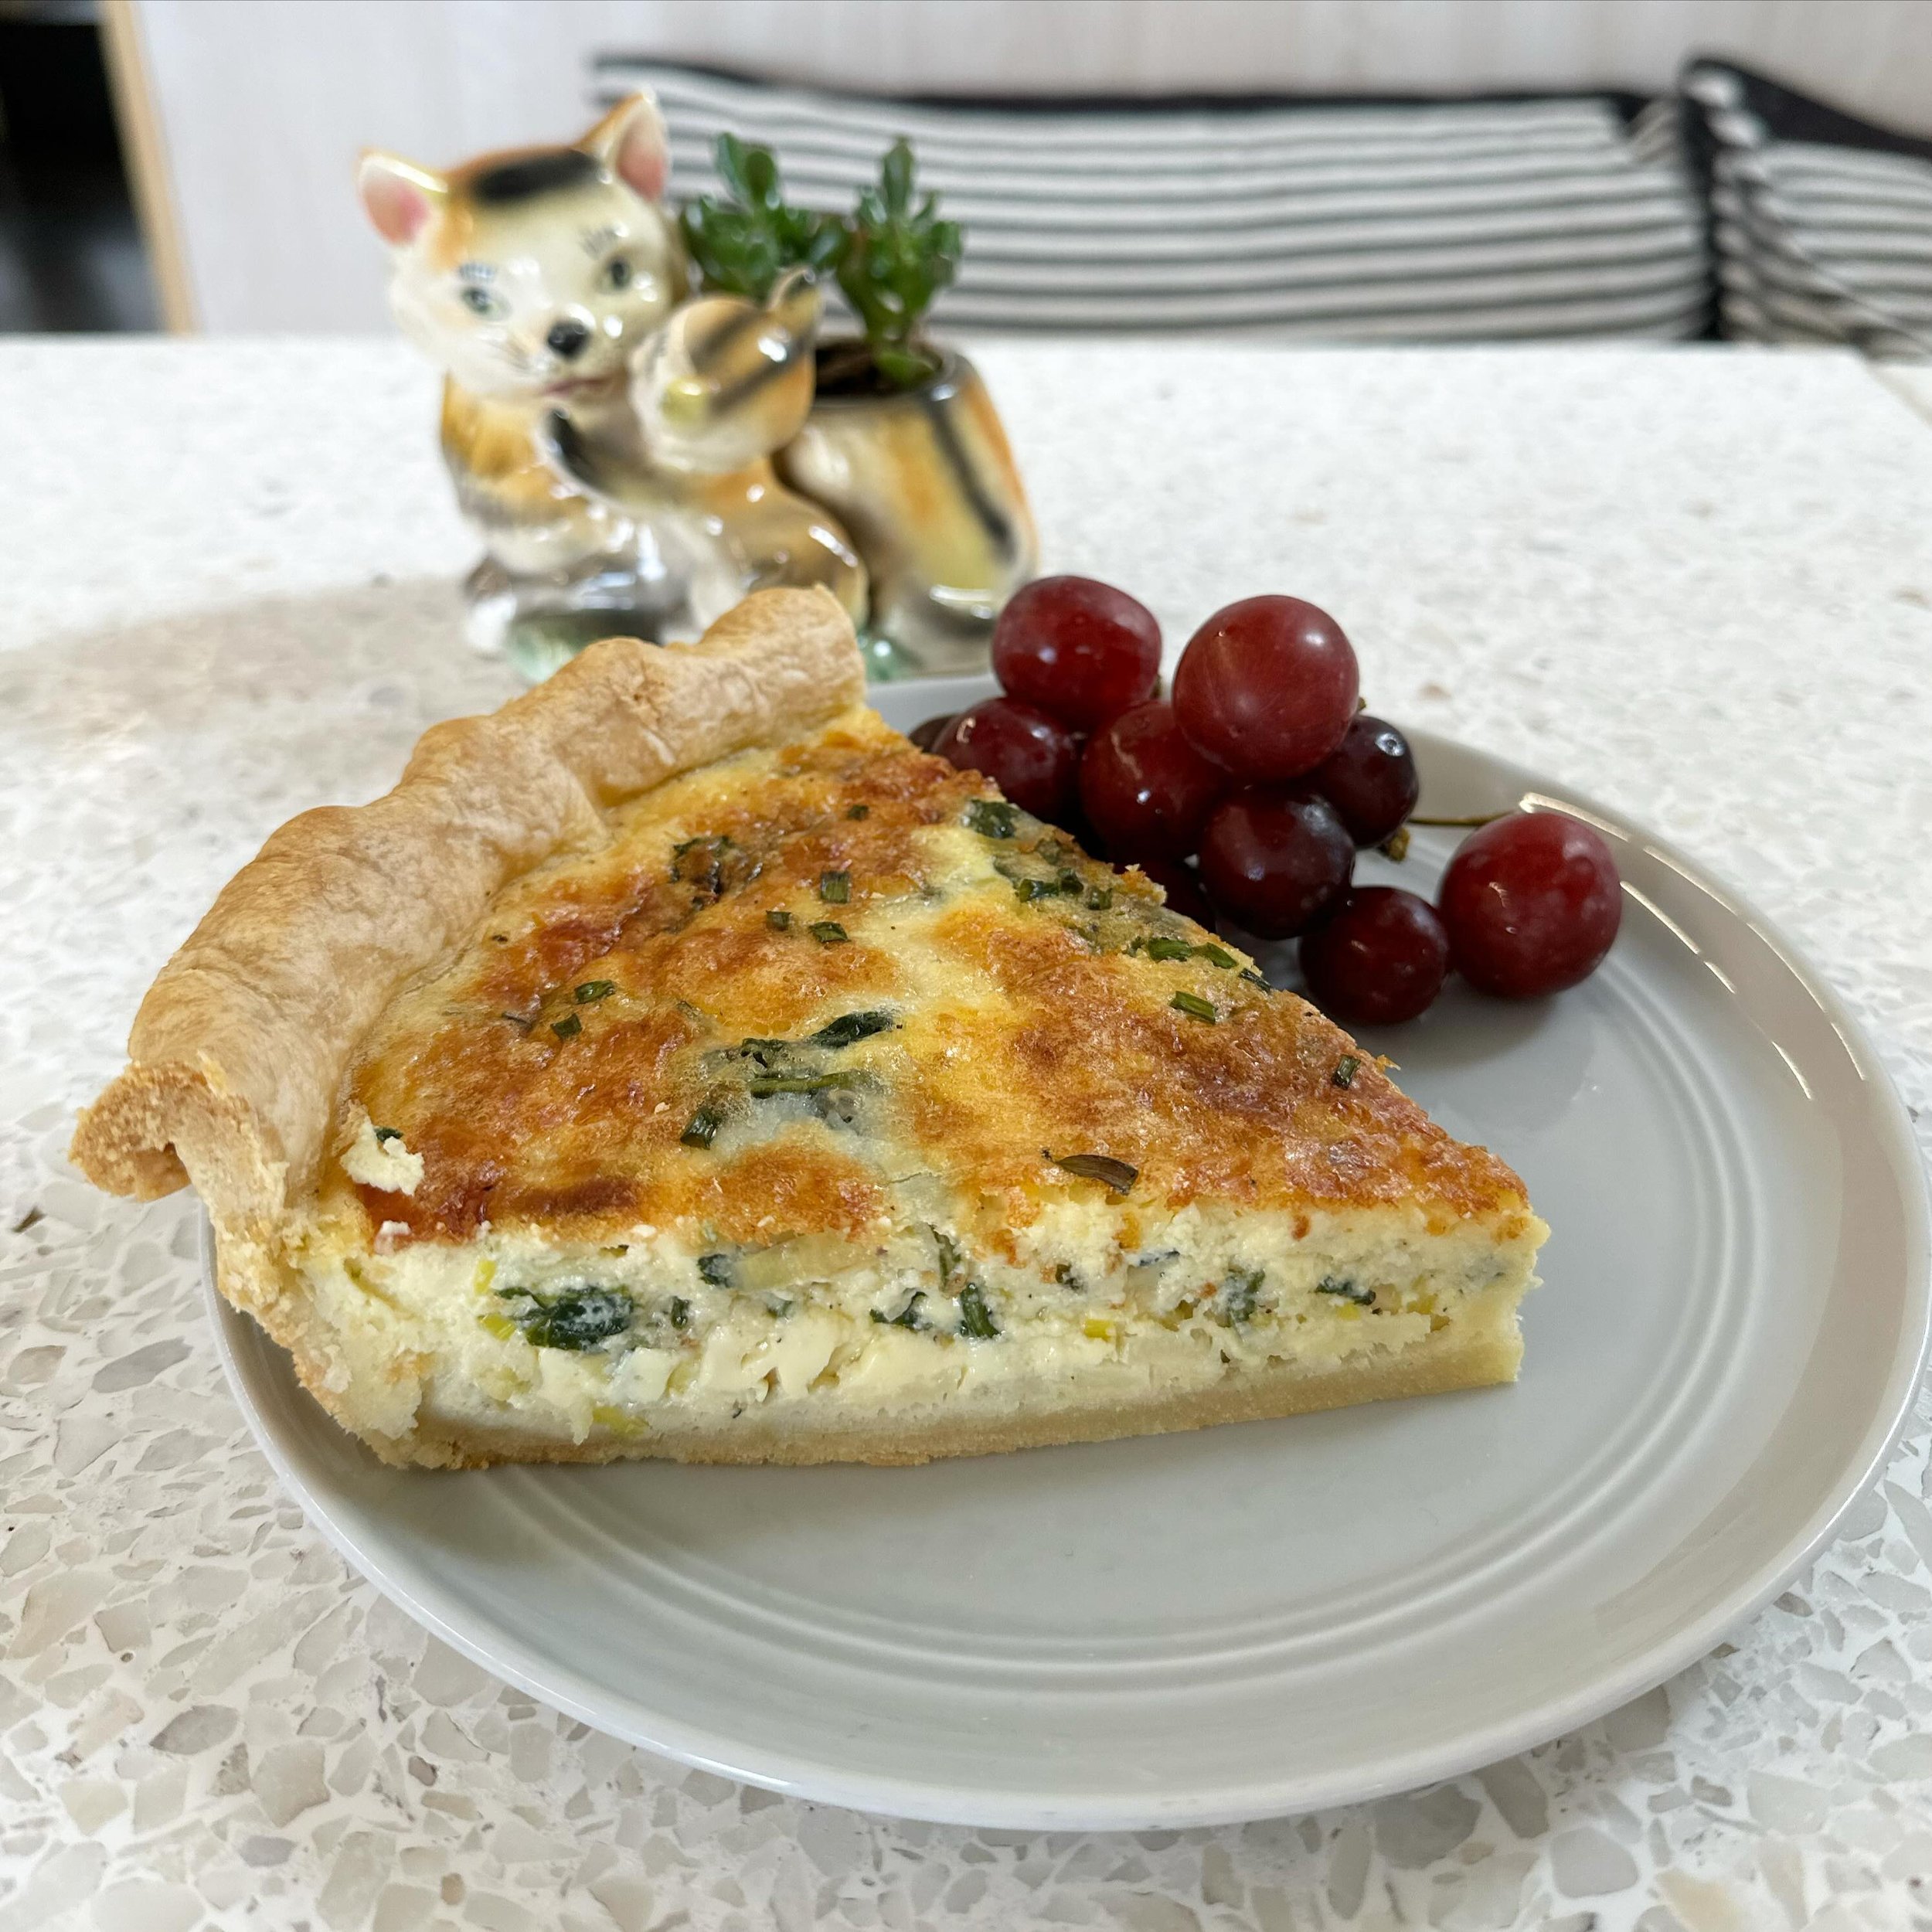 Quiche of the day is spinach leek! After a few very busy weeks we finally have a good number of available Cat Zone slots this week so come have #lunchwithcats! We still recommend booking cat time in advance but it looks like we&rsquo;ll have a decent